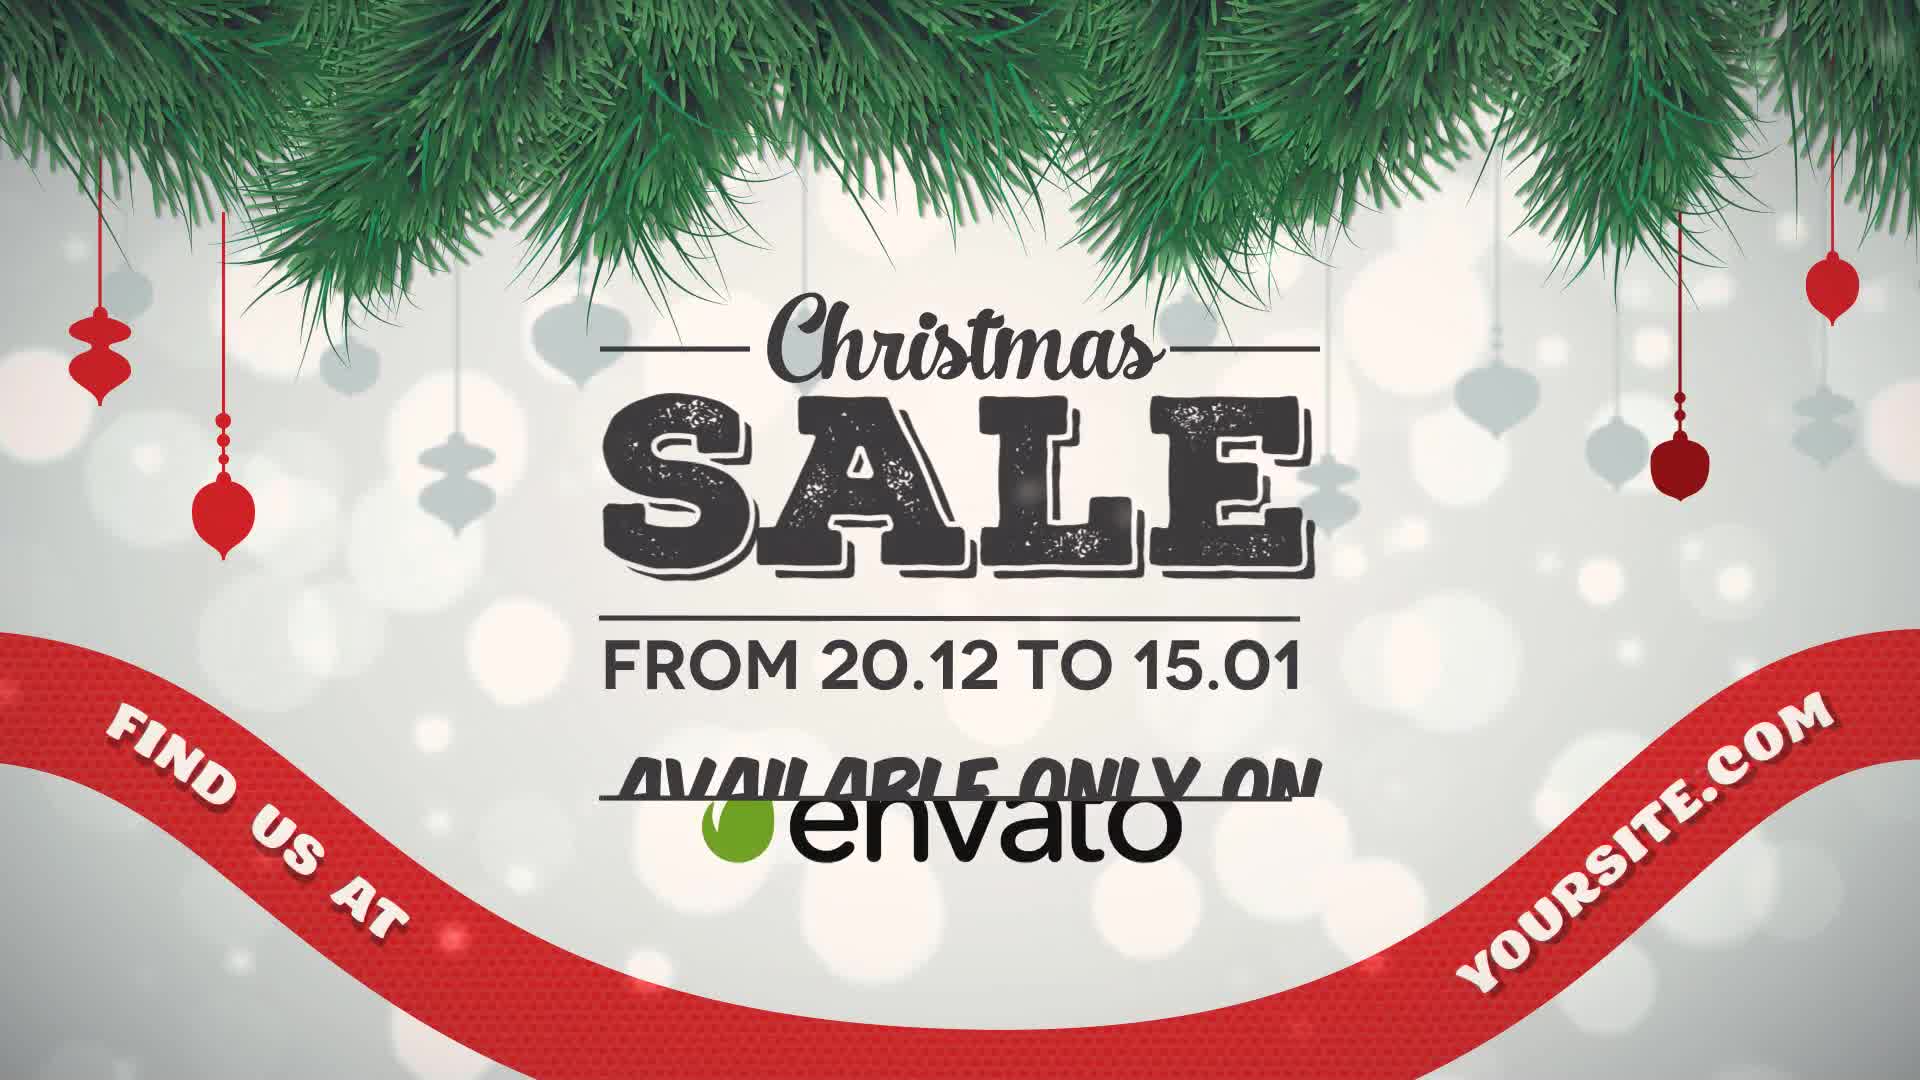 Christmas Sale - Download Videohive 9844961